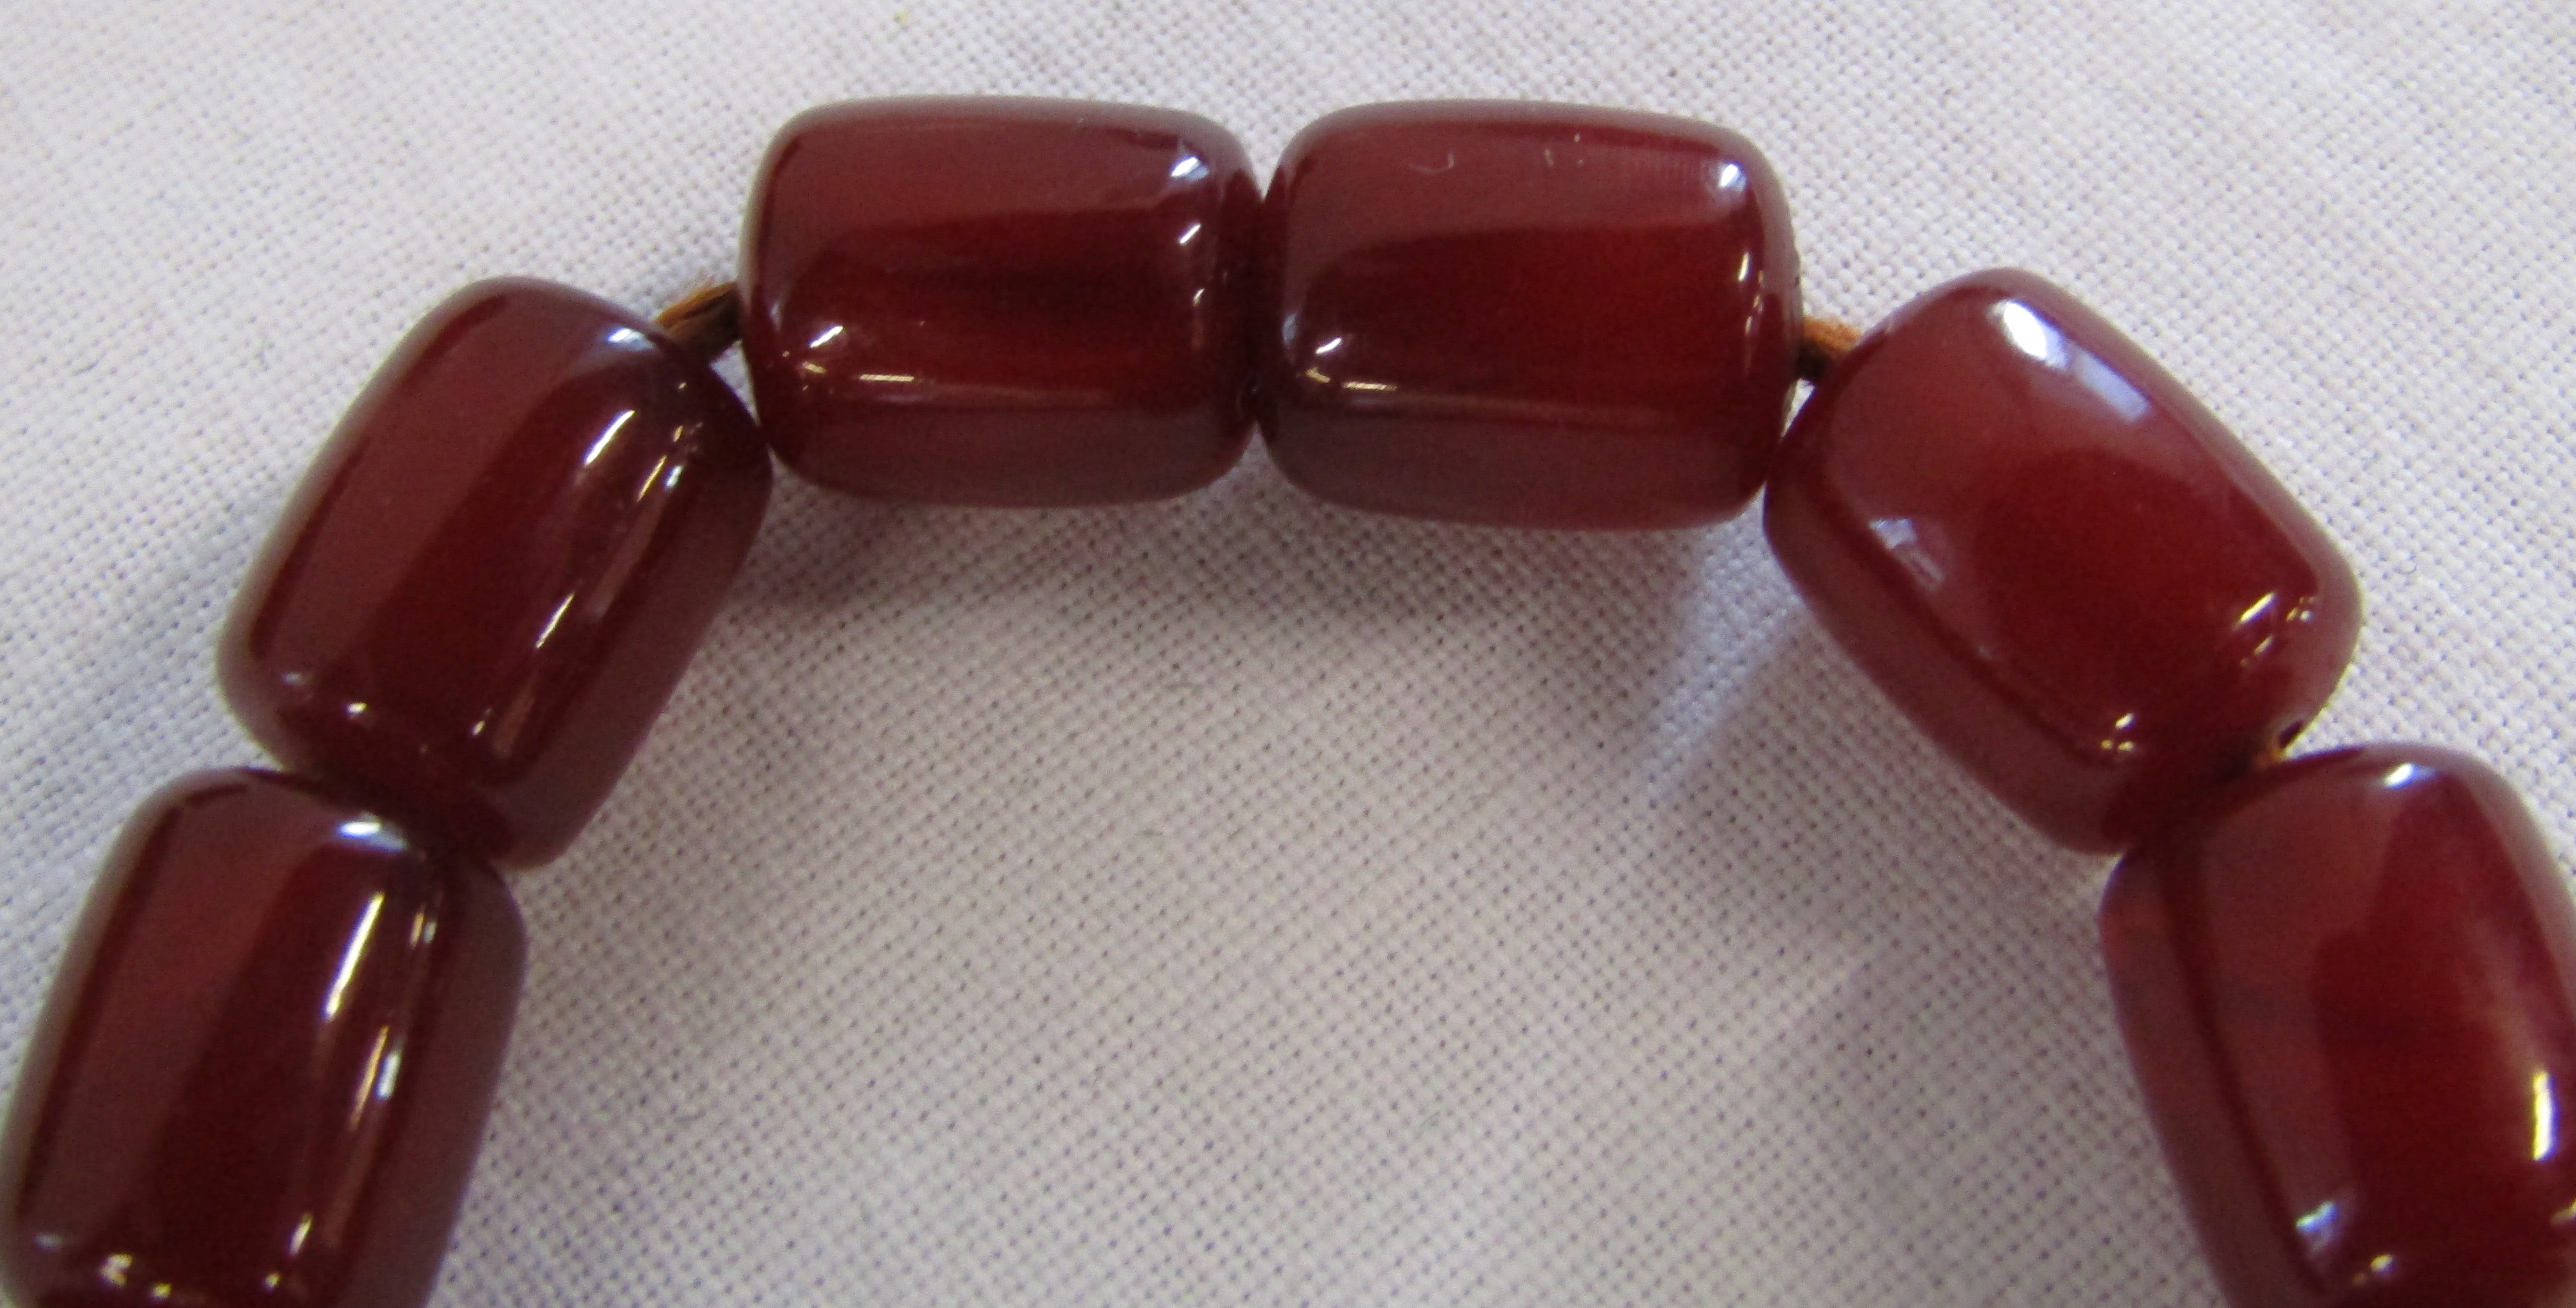 Graduated possibly amber bead necklace 116.6g, largest bead 3cm wide - Image 4 of 12